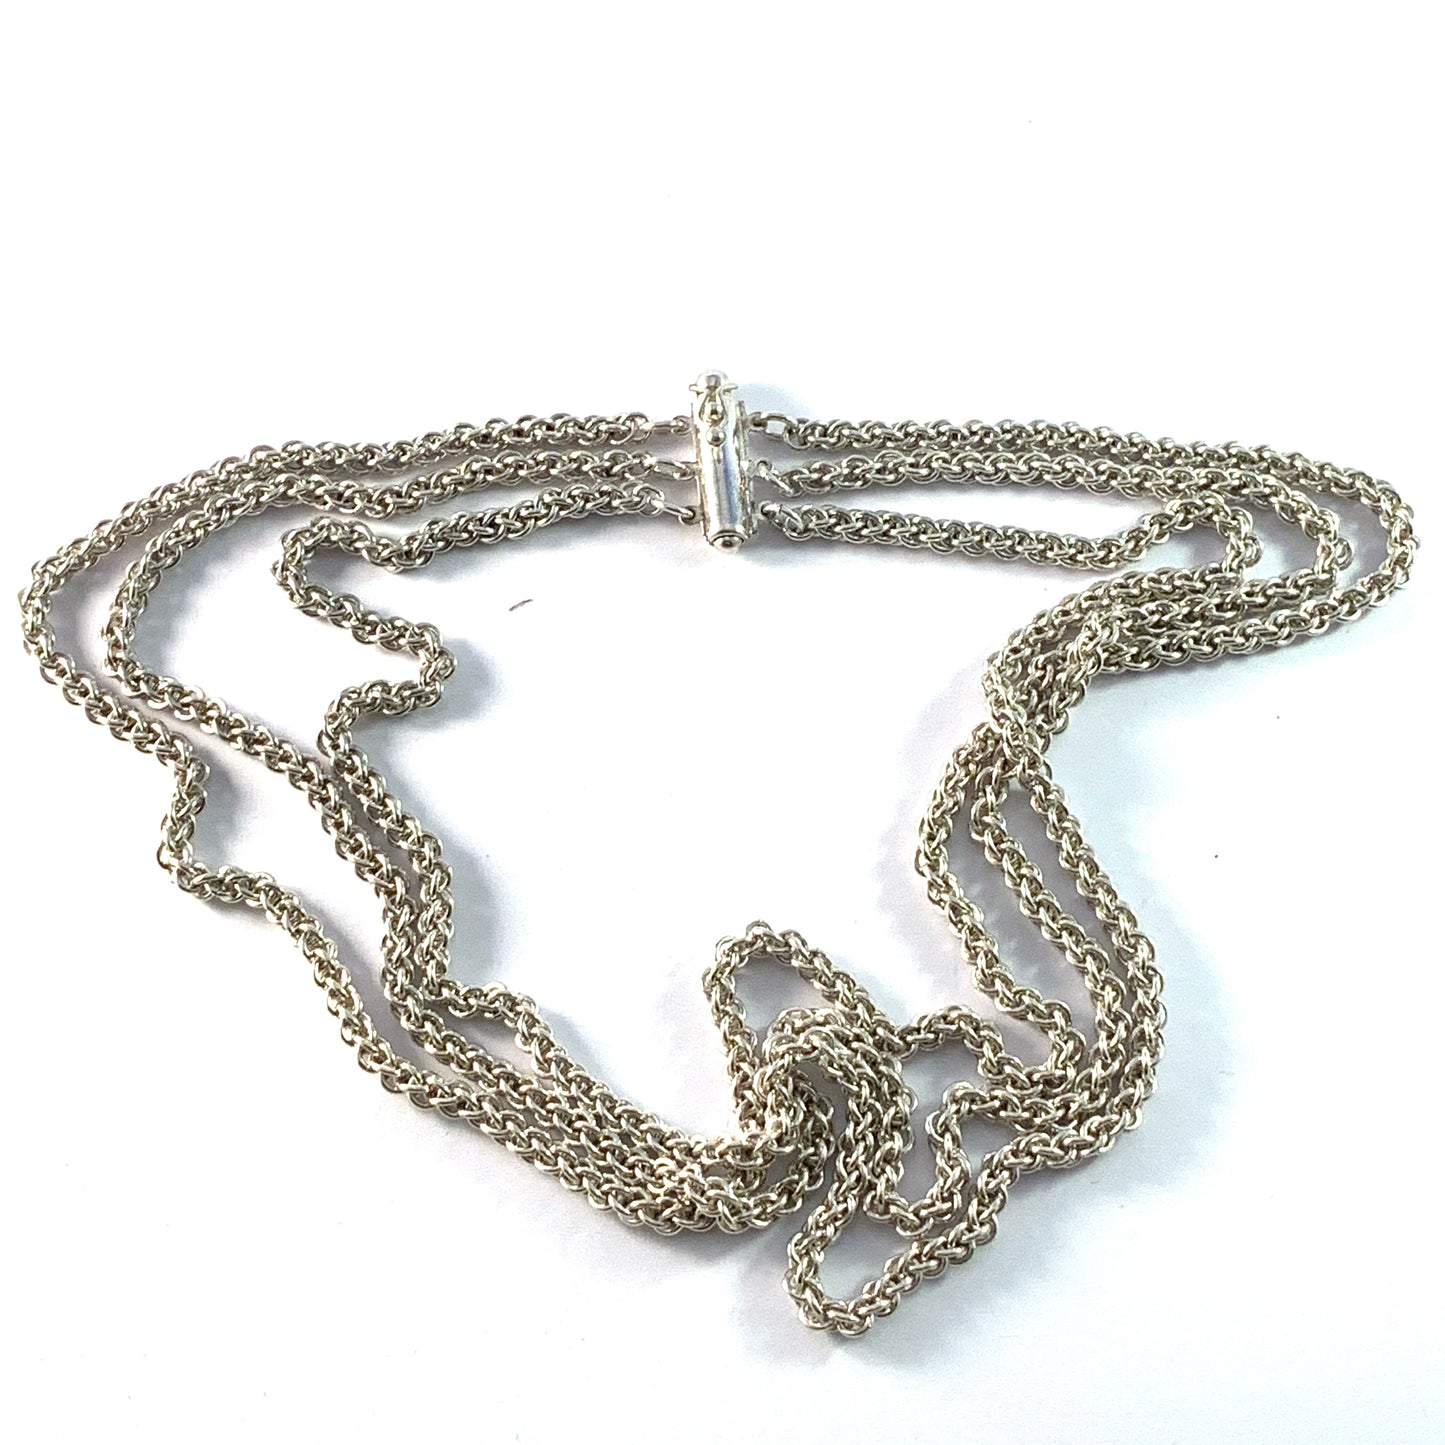 Vintage Sterling Silver 3-strand Chain Necklace. 2 oz.